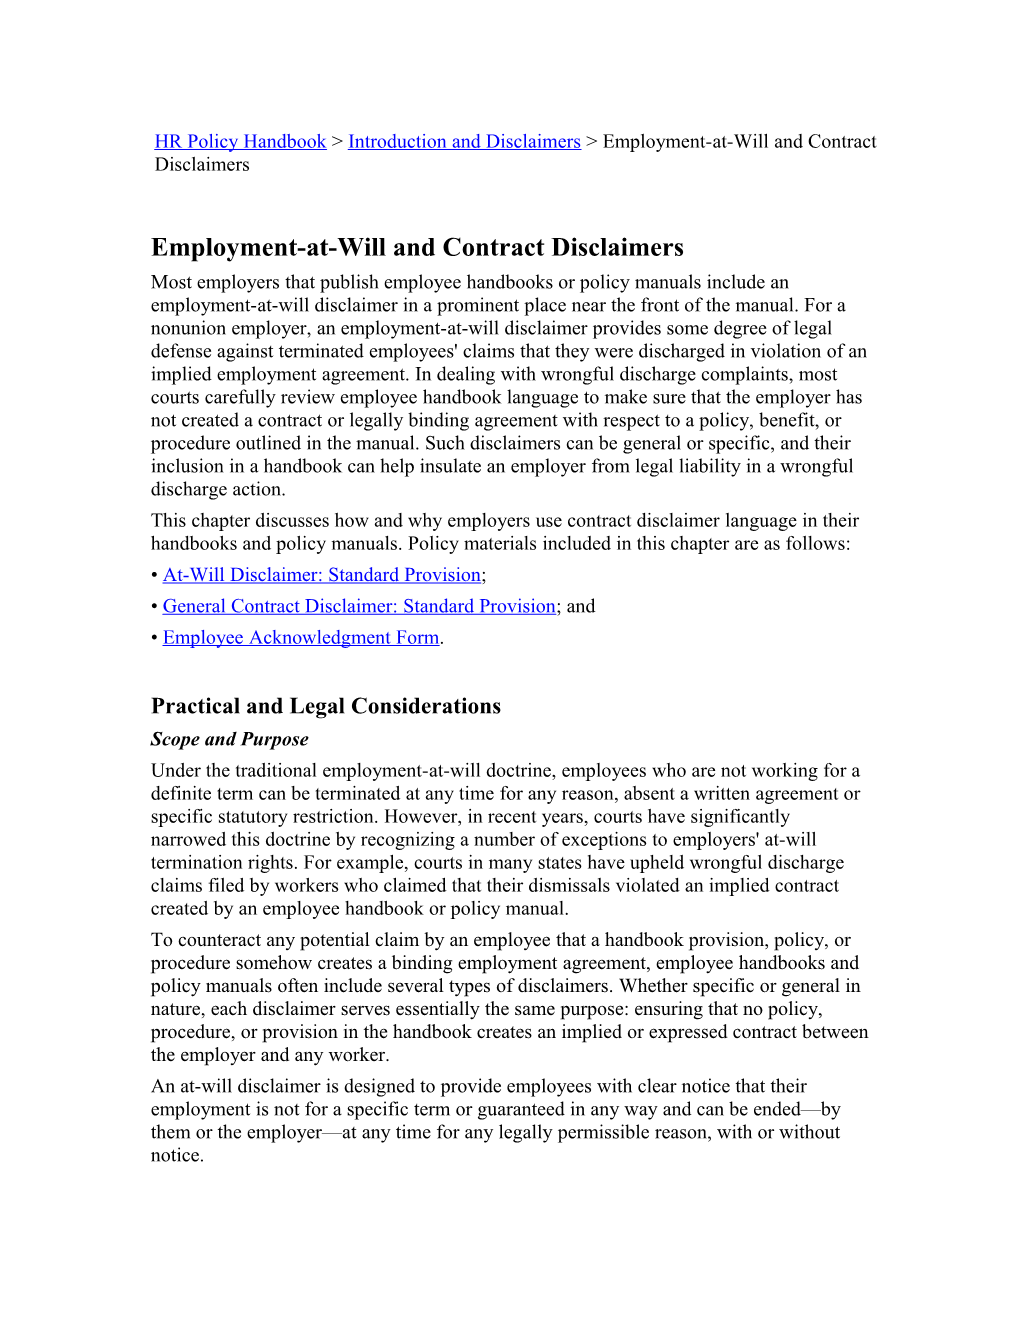 HR Policy Handbook Introduction and Disclaimers Employment-At-Will and Contract Disclaimers